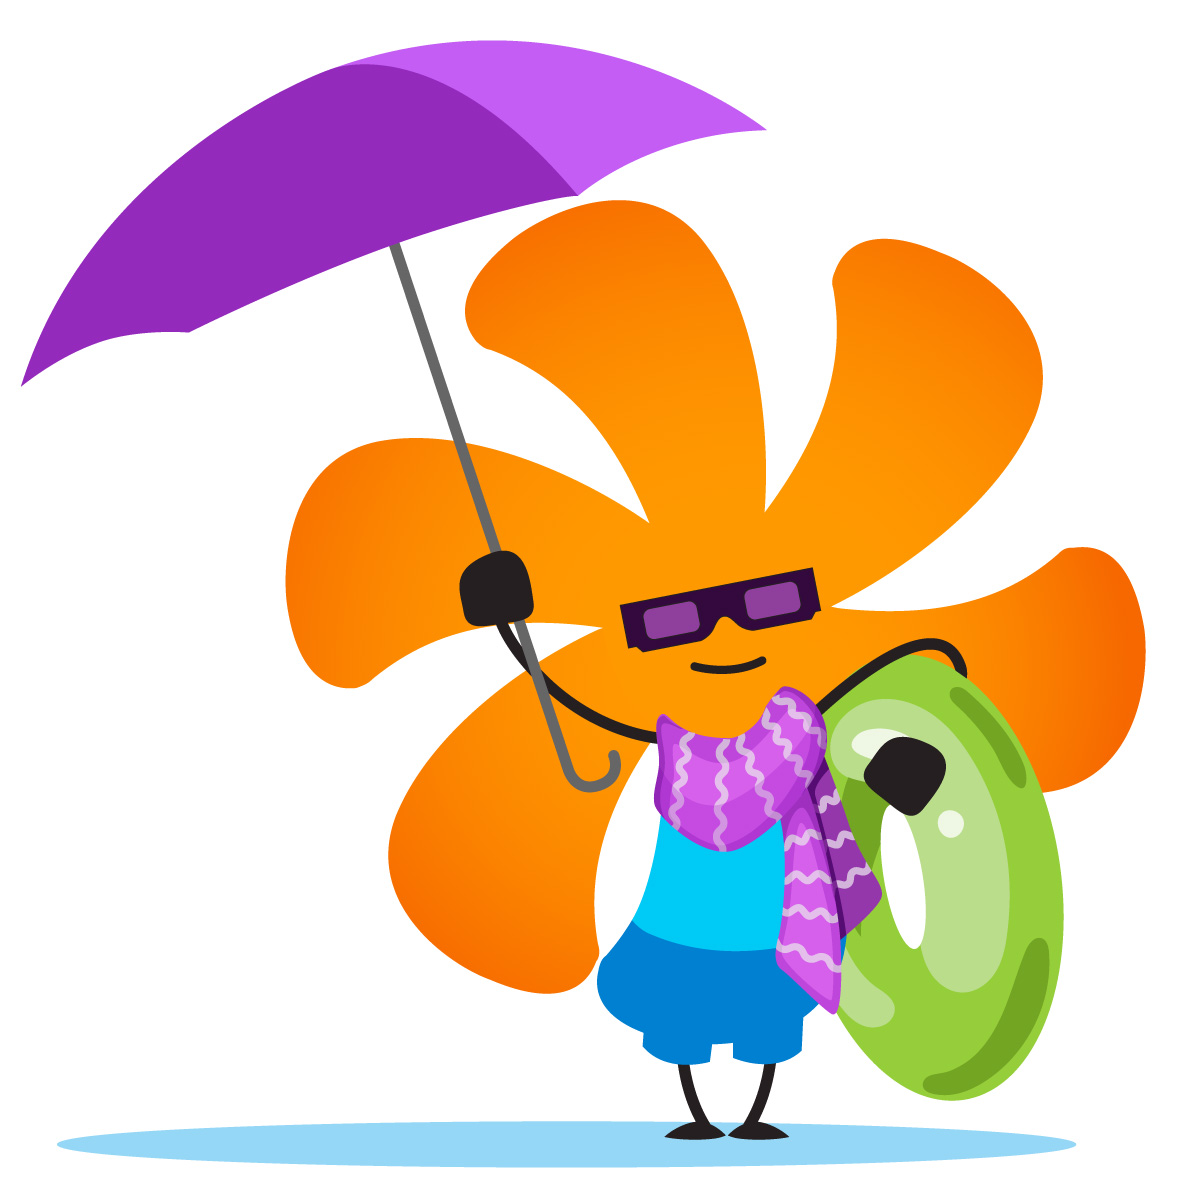 Aster with an umbrella and a raft wearing sunglasses